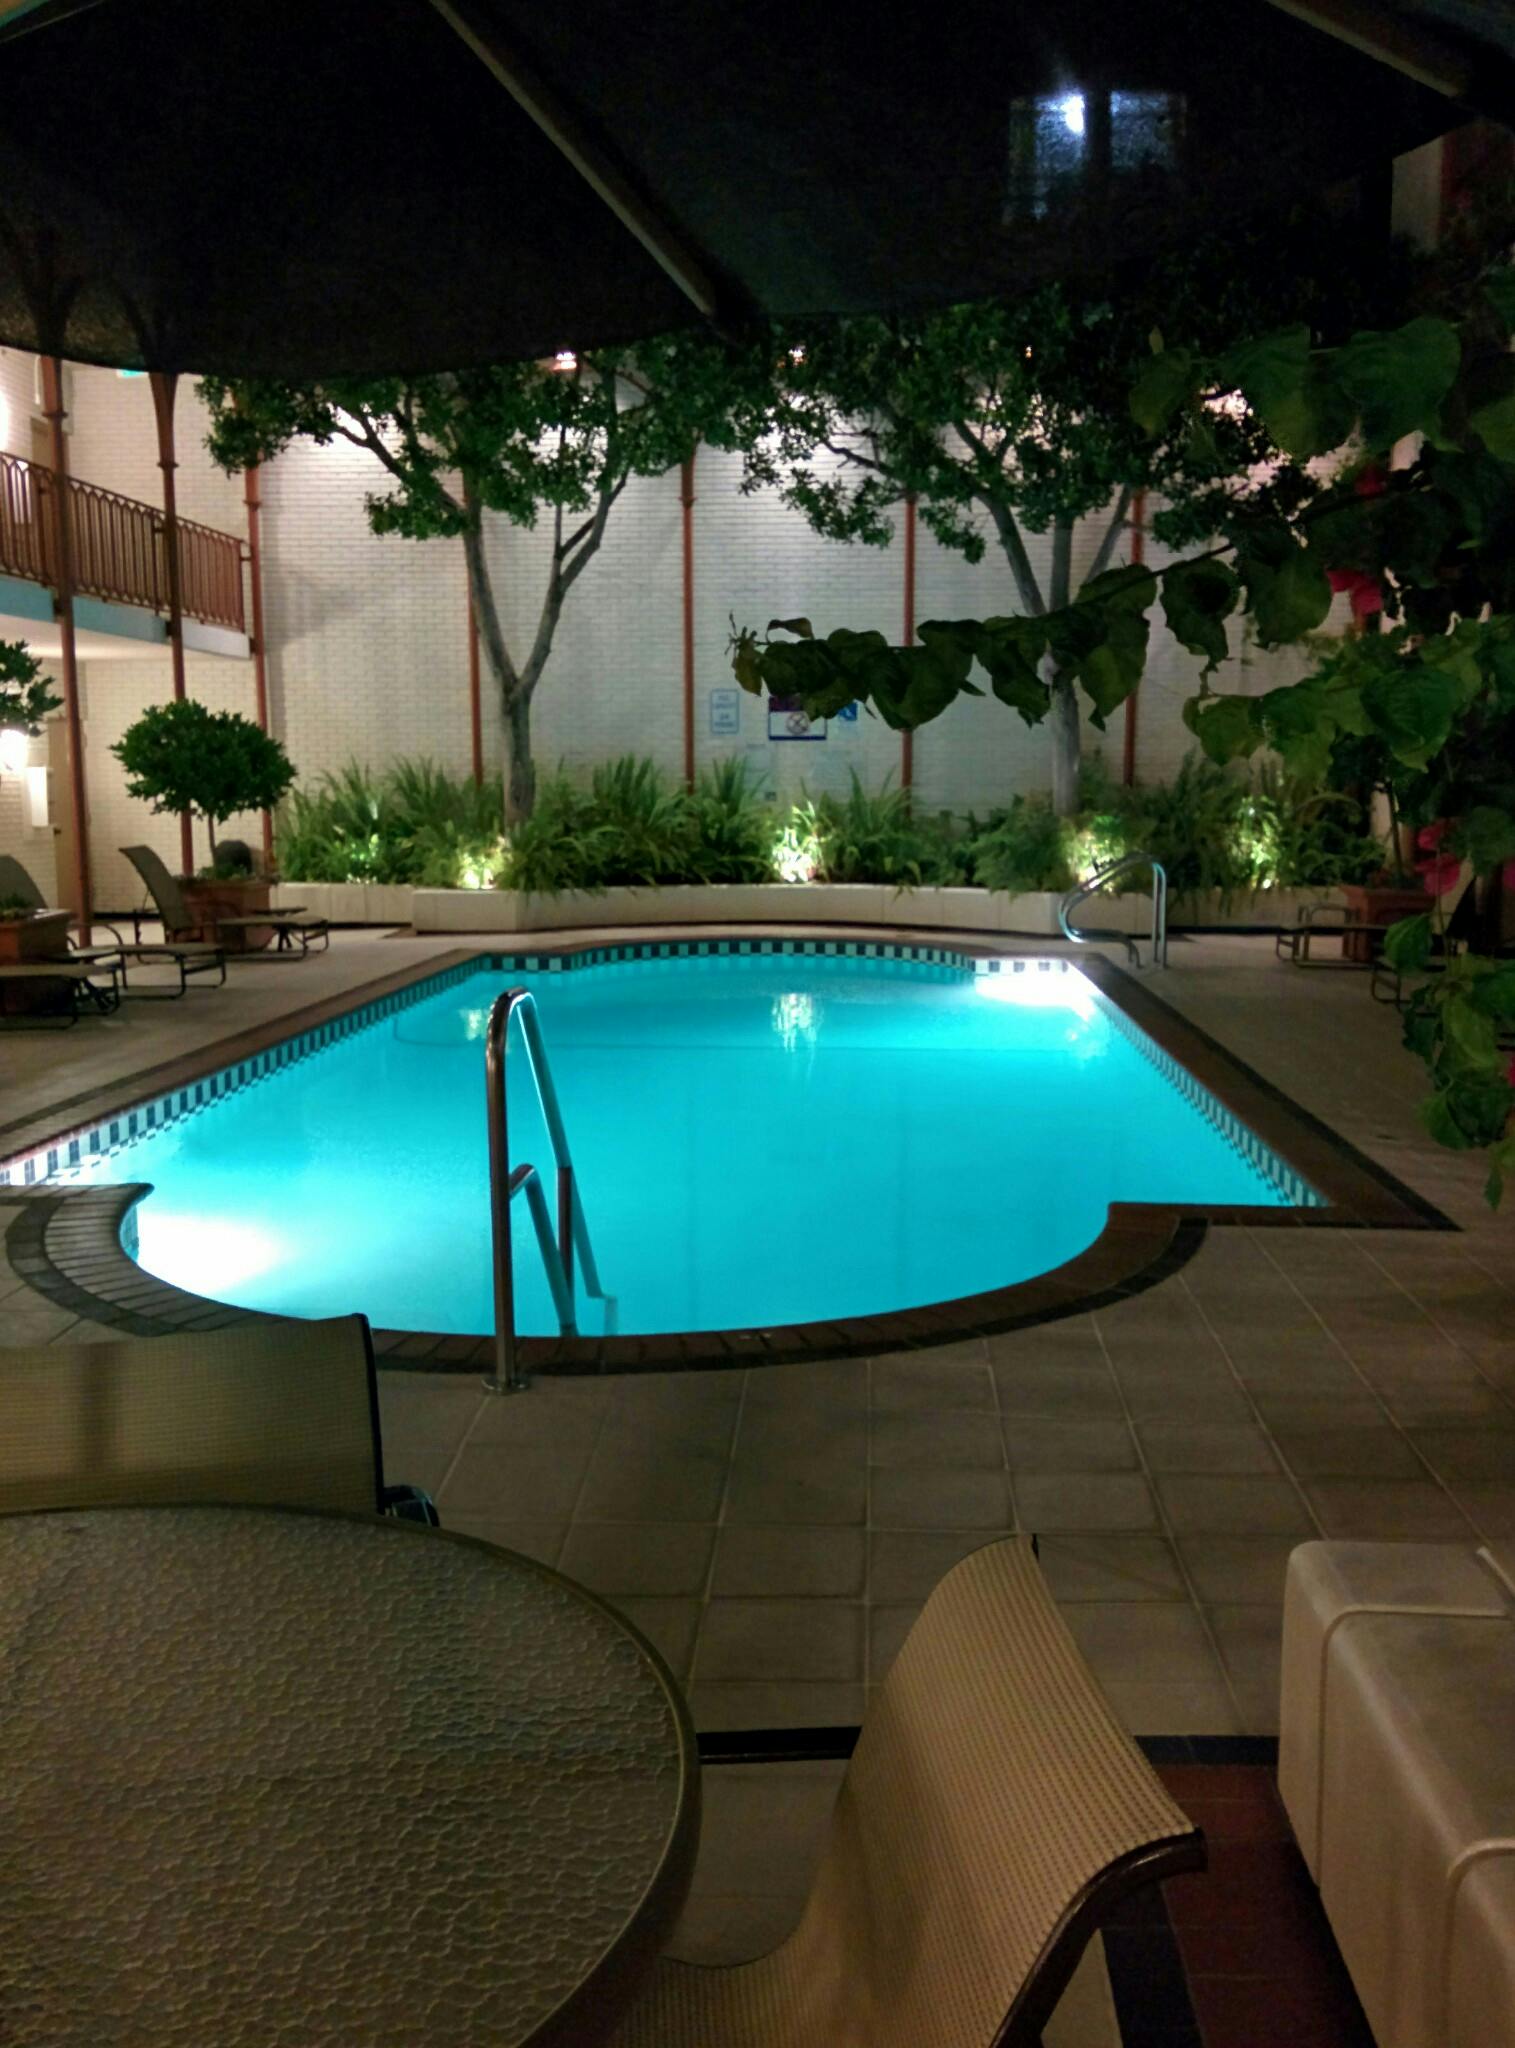 is it good to swim in a pool at night